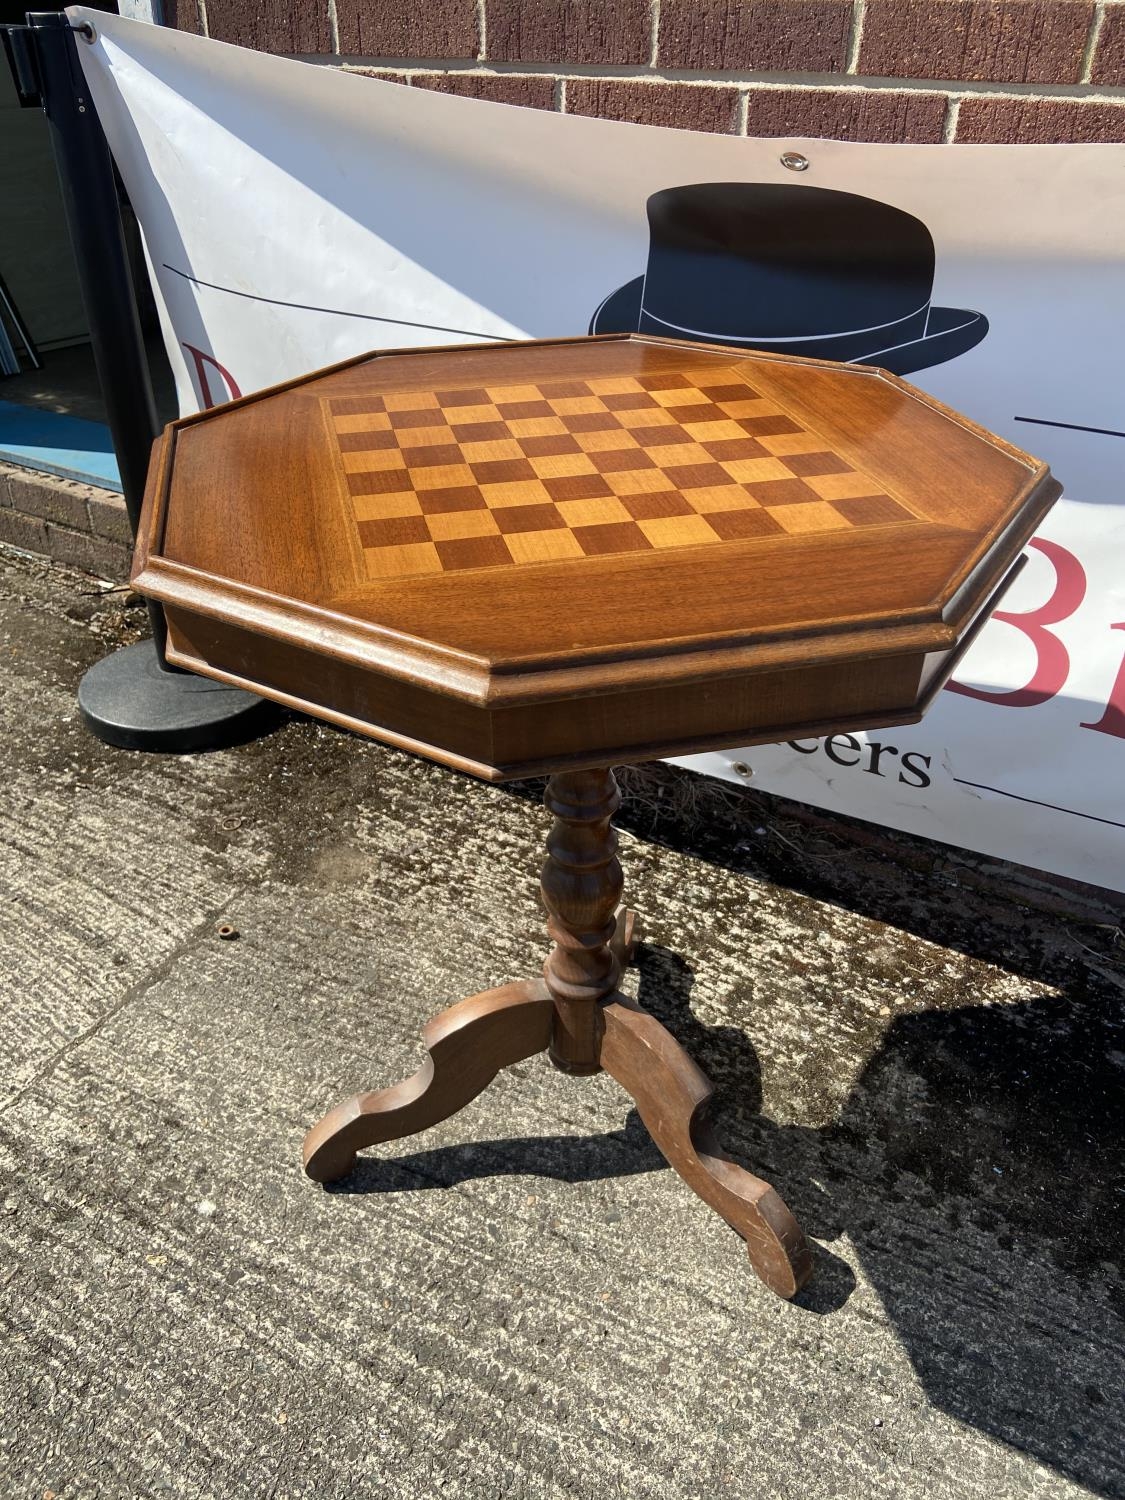 Single pedestal chess board top table [69x59x59cm] - Image 2 of 3